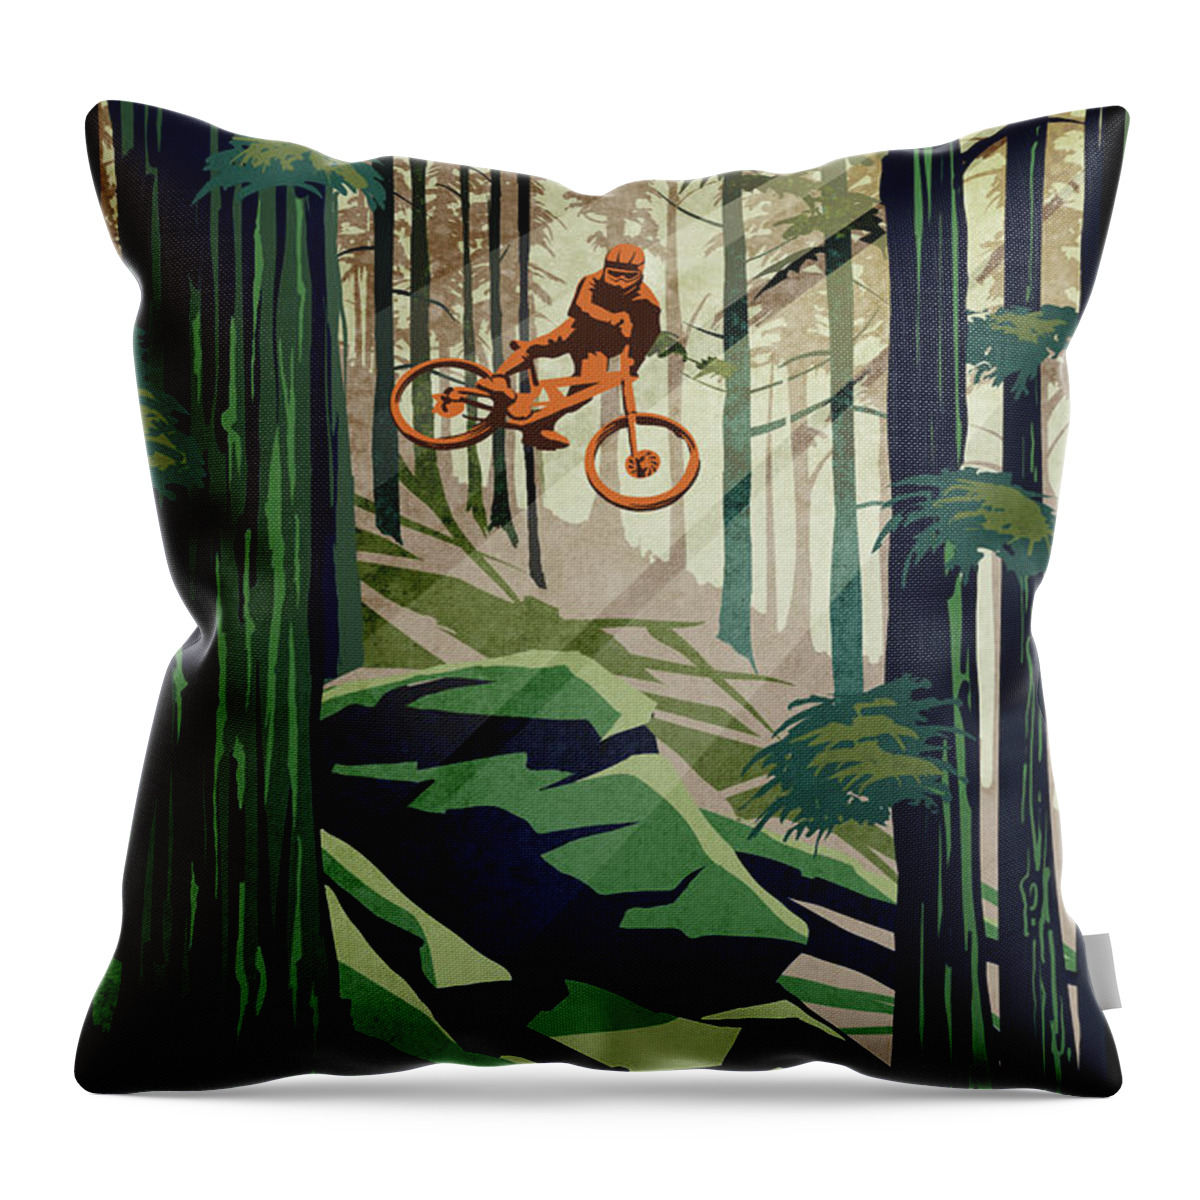 Mountain Bike Throw Pillow featuring the painting My Therapy by Sassan Filsoof